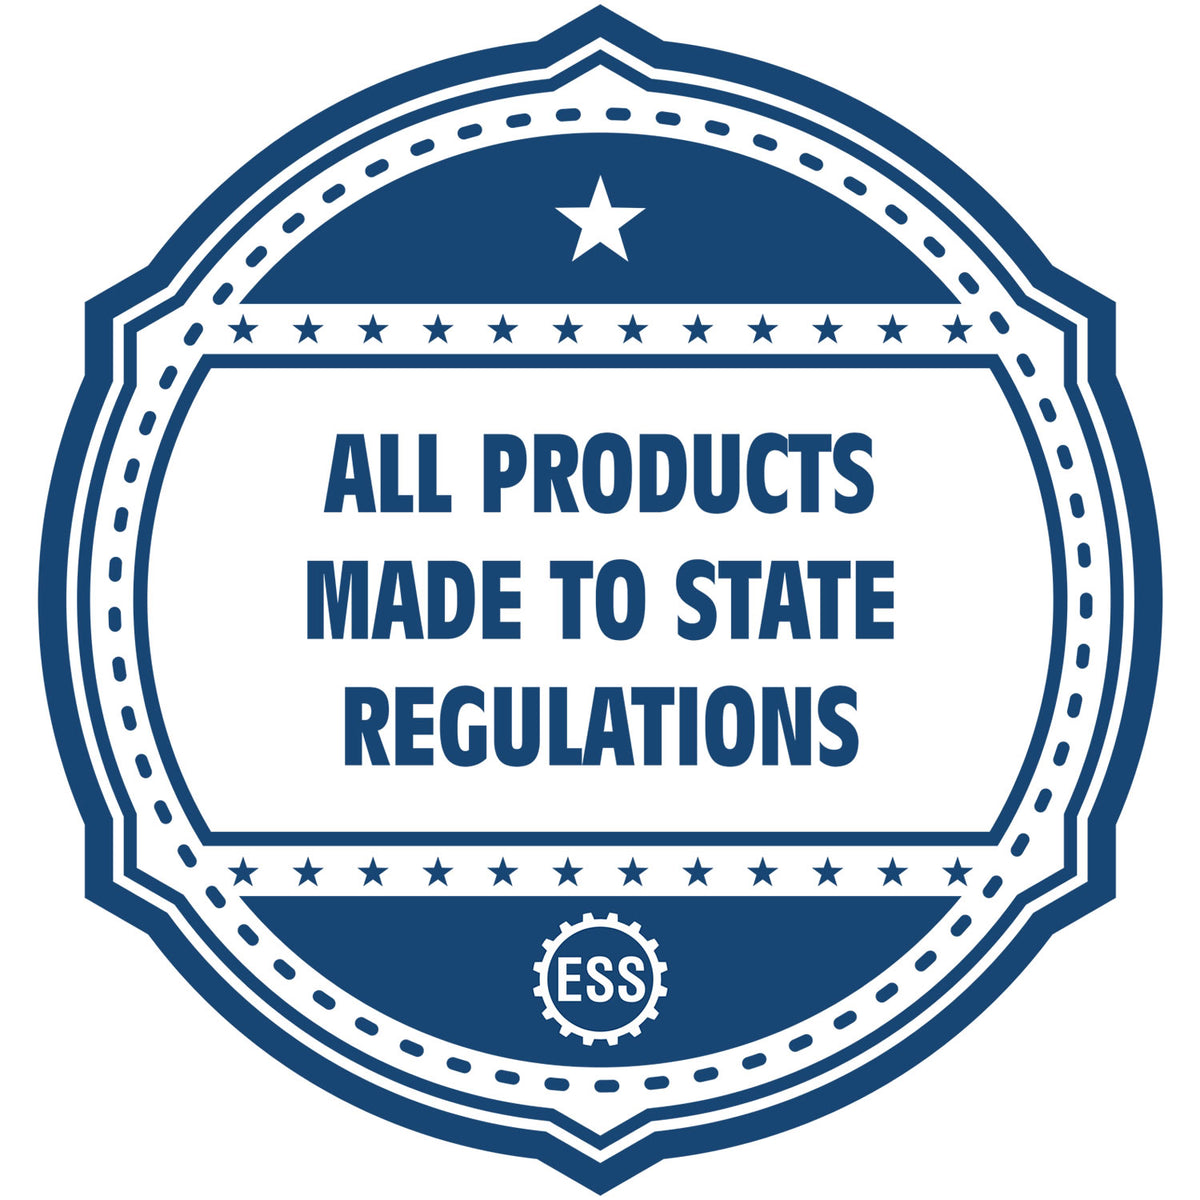 A blue icon or badge for the Slim Pre-Inked Florida Professional Geologist Seal Stamp showing that this product is made in compliance with state regulations.